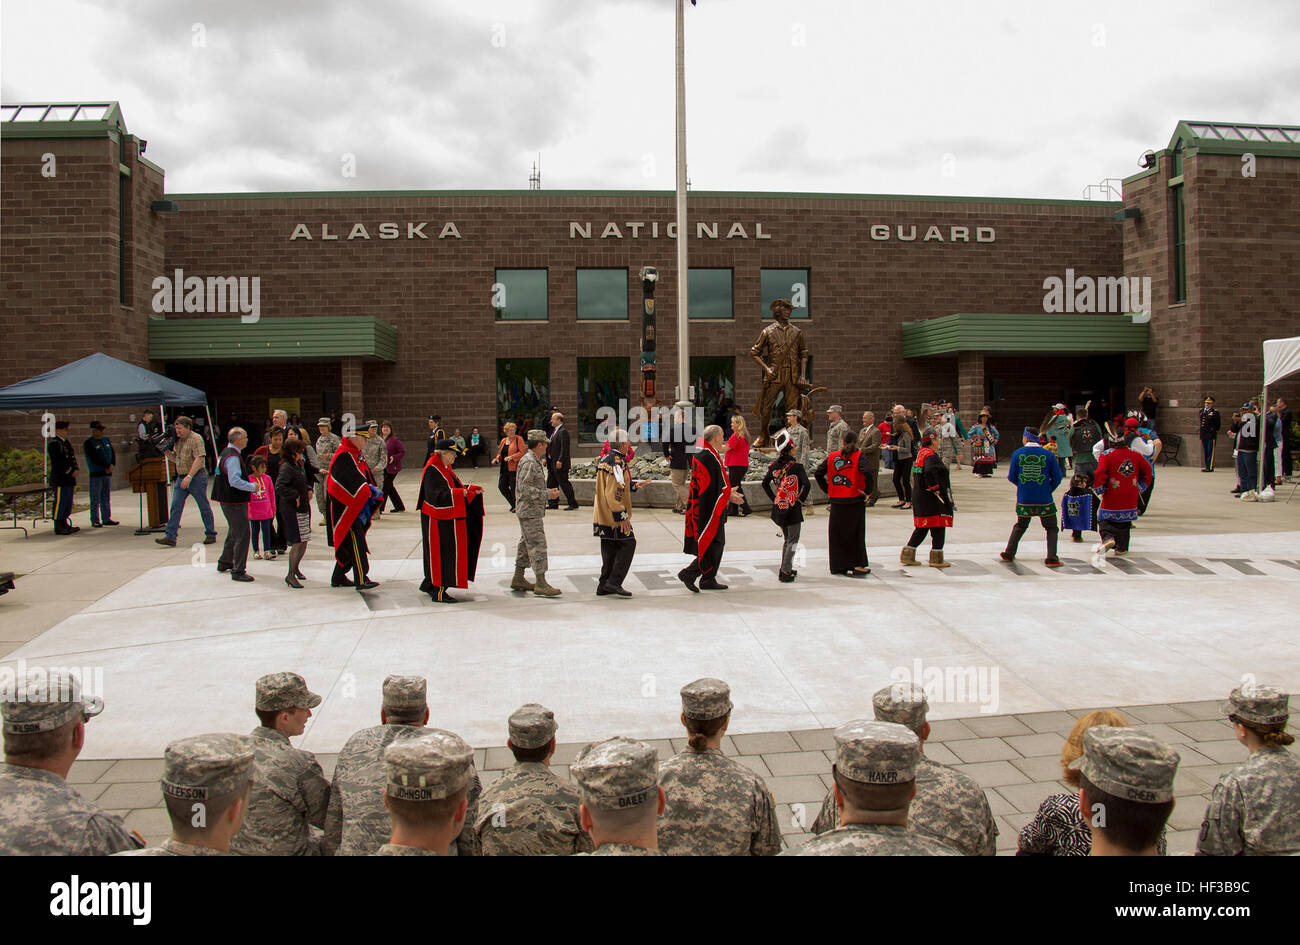 Gov. Bill Walker, center in red and black Tlingit button blanket, and Lt. Gov. Byron Mallott, left of governor, participate in a Blessing and Cleansing ceremony at the Alaska National Guard armory on Joint Base Elmendorf-Richardson May 26. The Blessing and Cleansing ceremony is a complex and symbolic event to reinvigorate the spirit of the National Guard that is embodied in the honor pole, which was carved by George Bennett and his son James Bennett in Sitka, Alaska, to honor the Alaska National Guard’s past and present military service, seen in the background. Alaska National Guard receives n Stock Photo